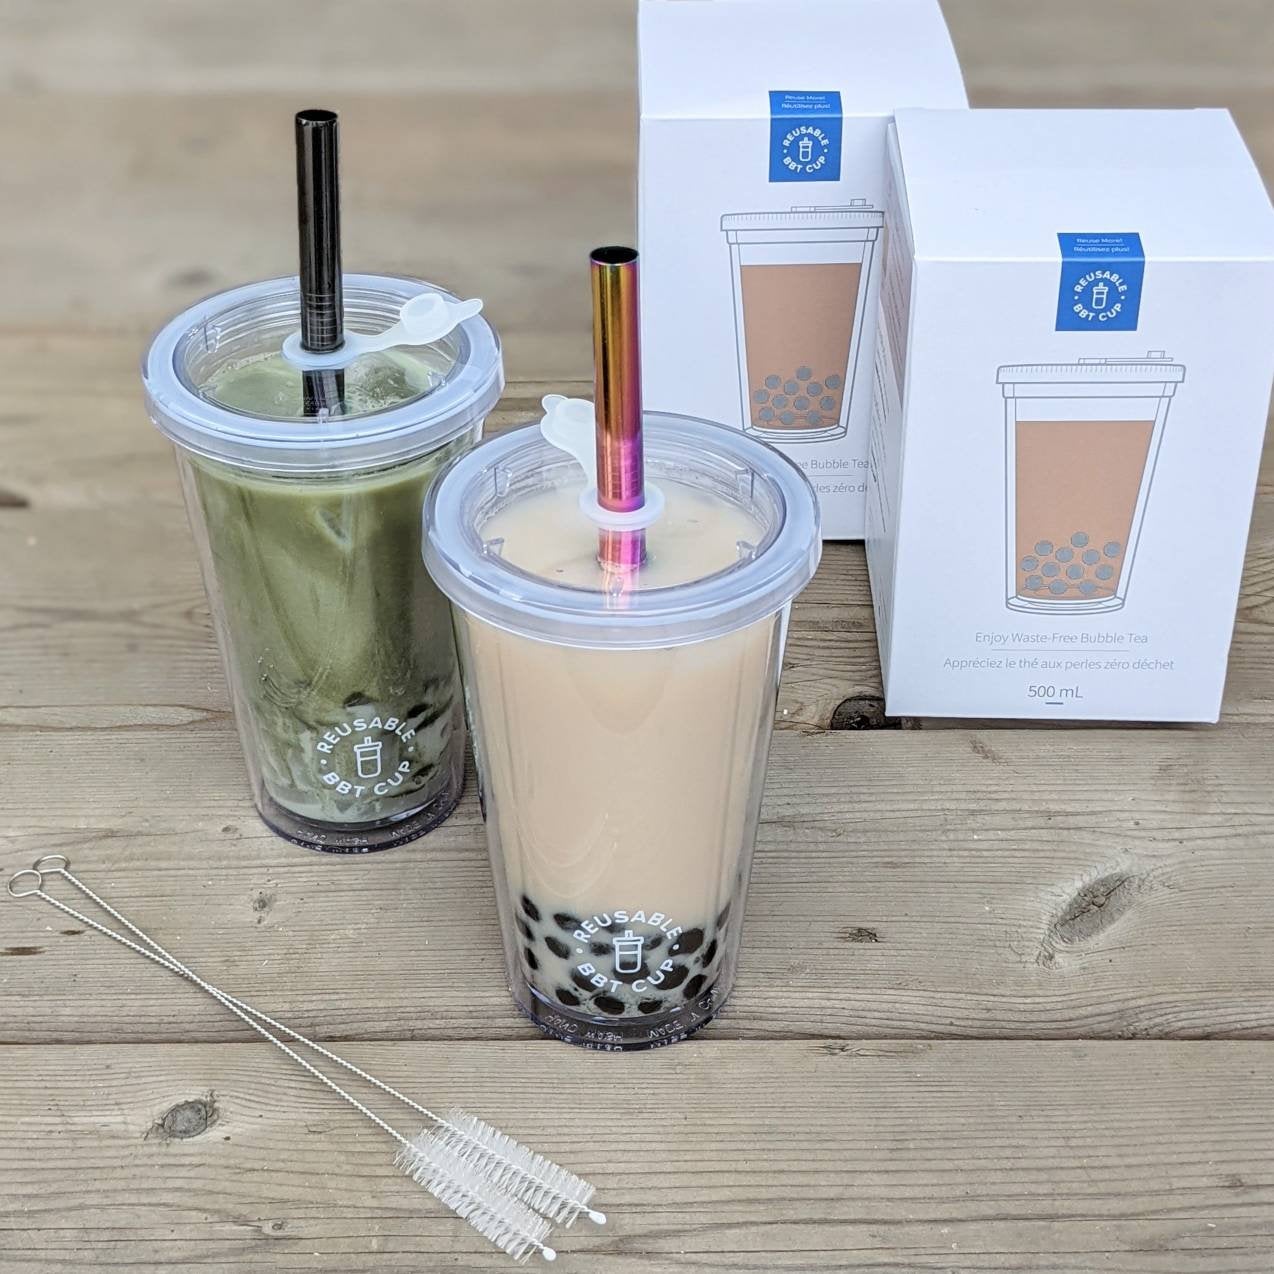 2 PACK: 500ml Leak-Proof Insulated Reusable Bubble Tea Cup